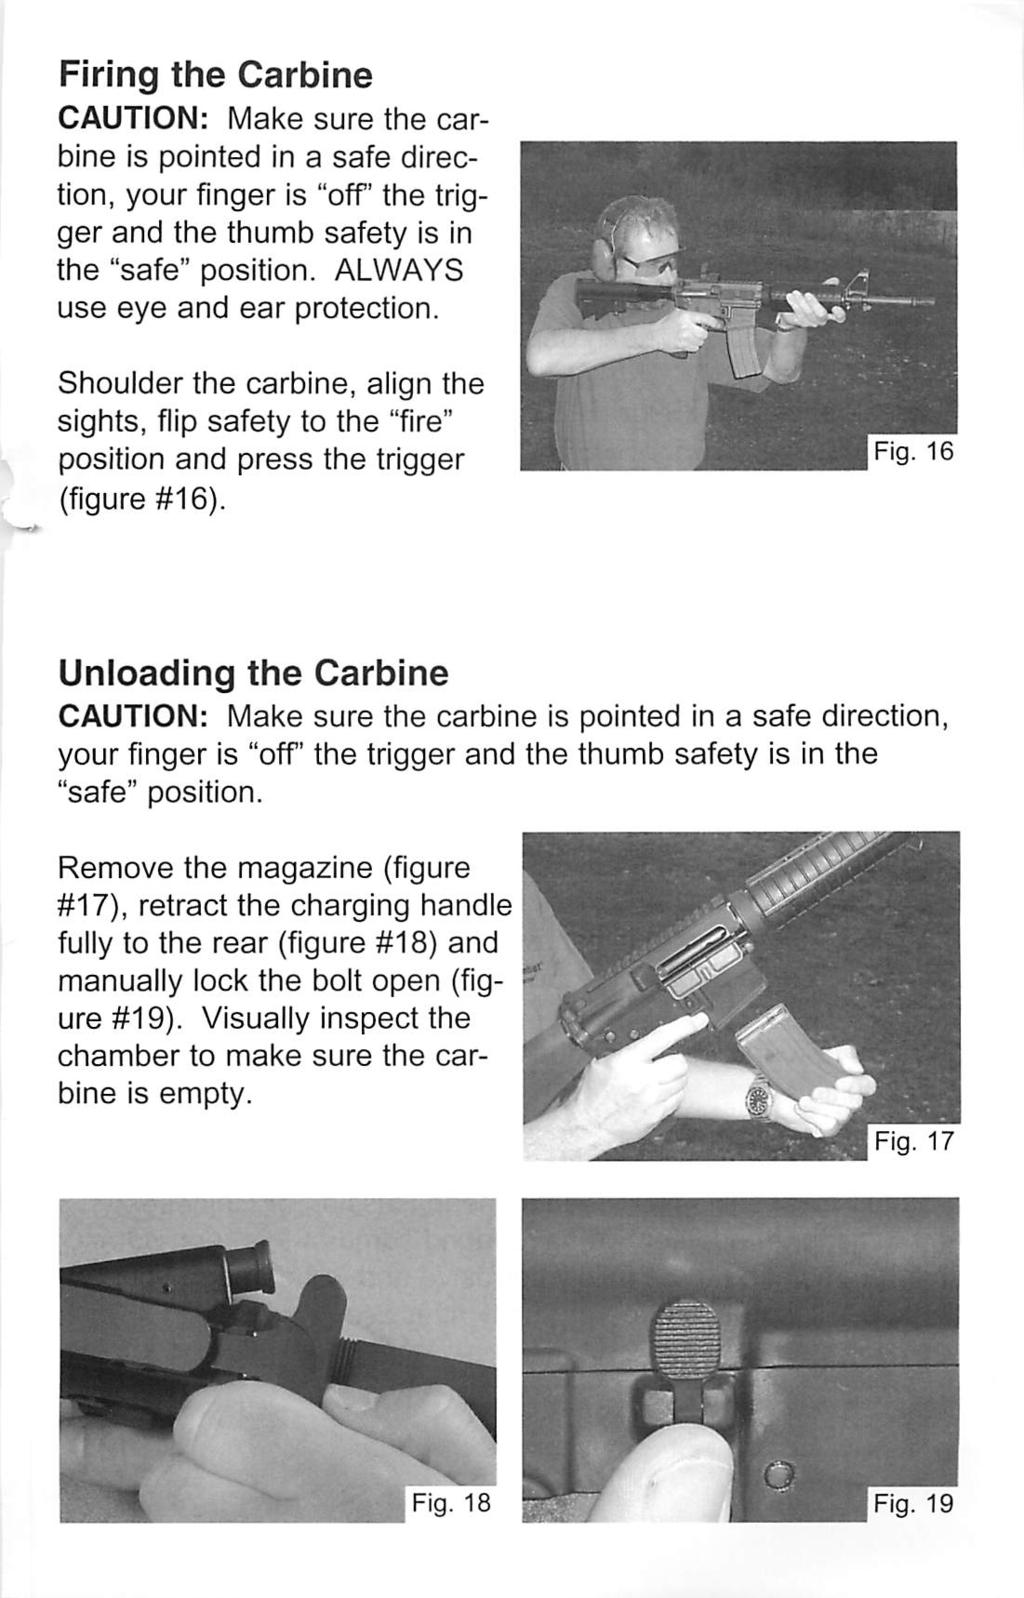 Firing the Carbine CAUTION: Make sure the car bine is pointed in a safe direc tion, your finger is "off' the trig ger and the thumb safety is in the "safe" position. ALWAYS use eye and ear protection.